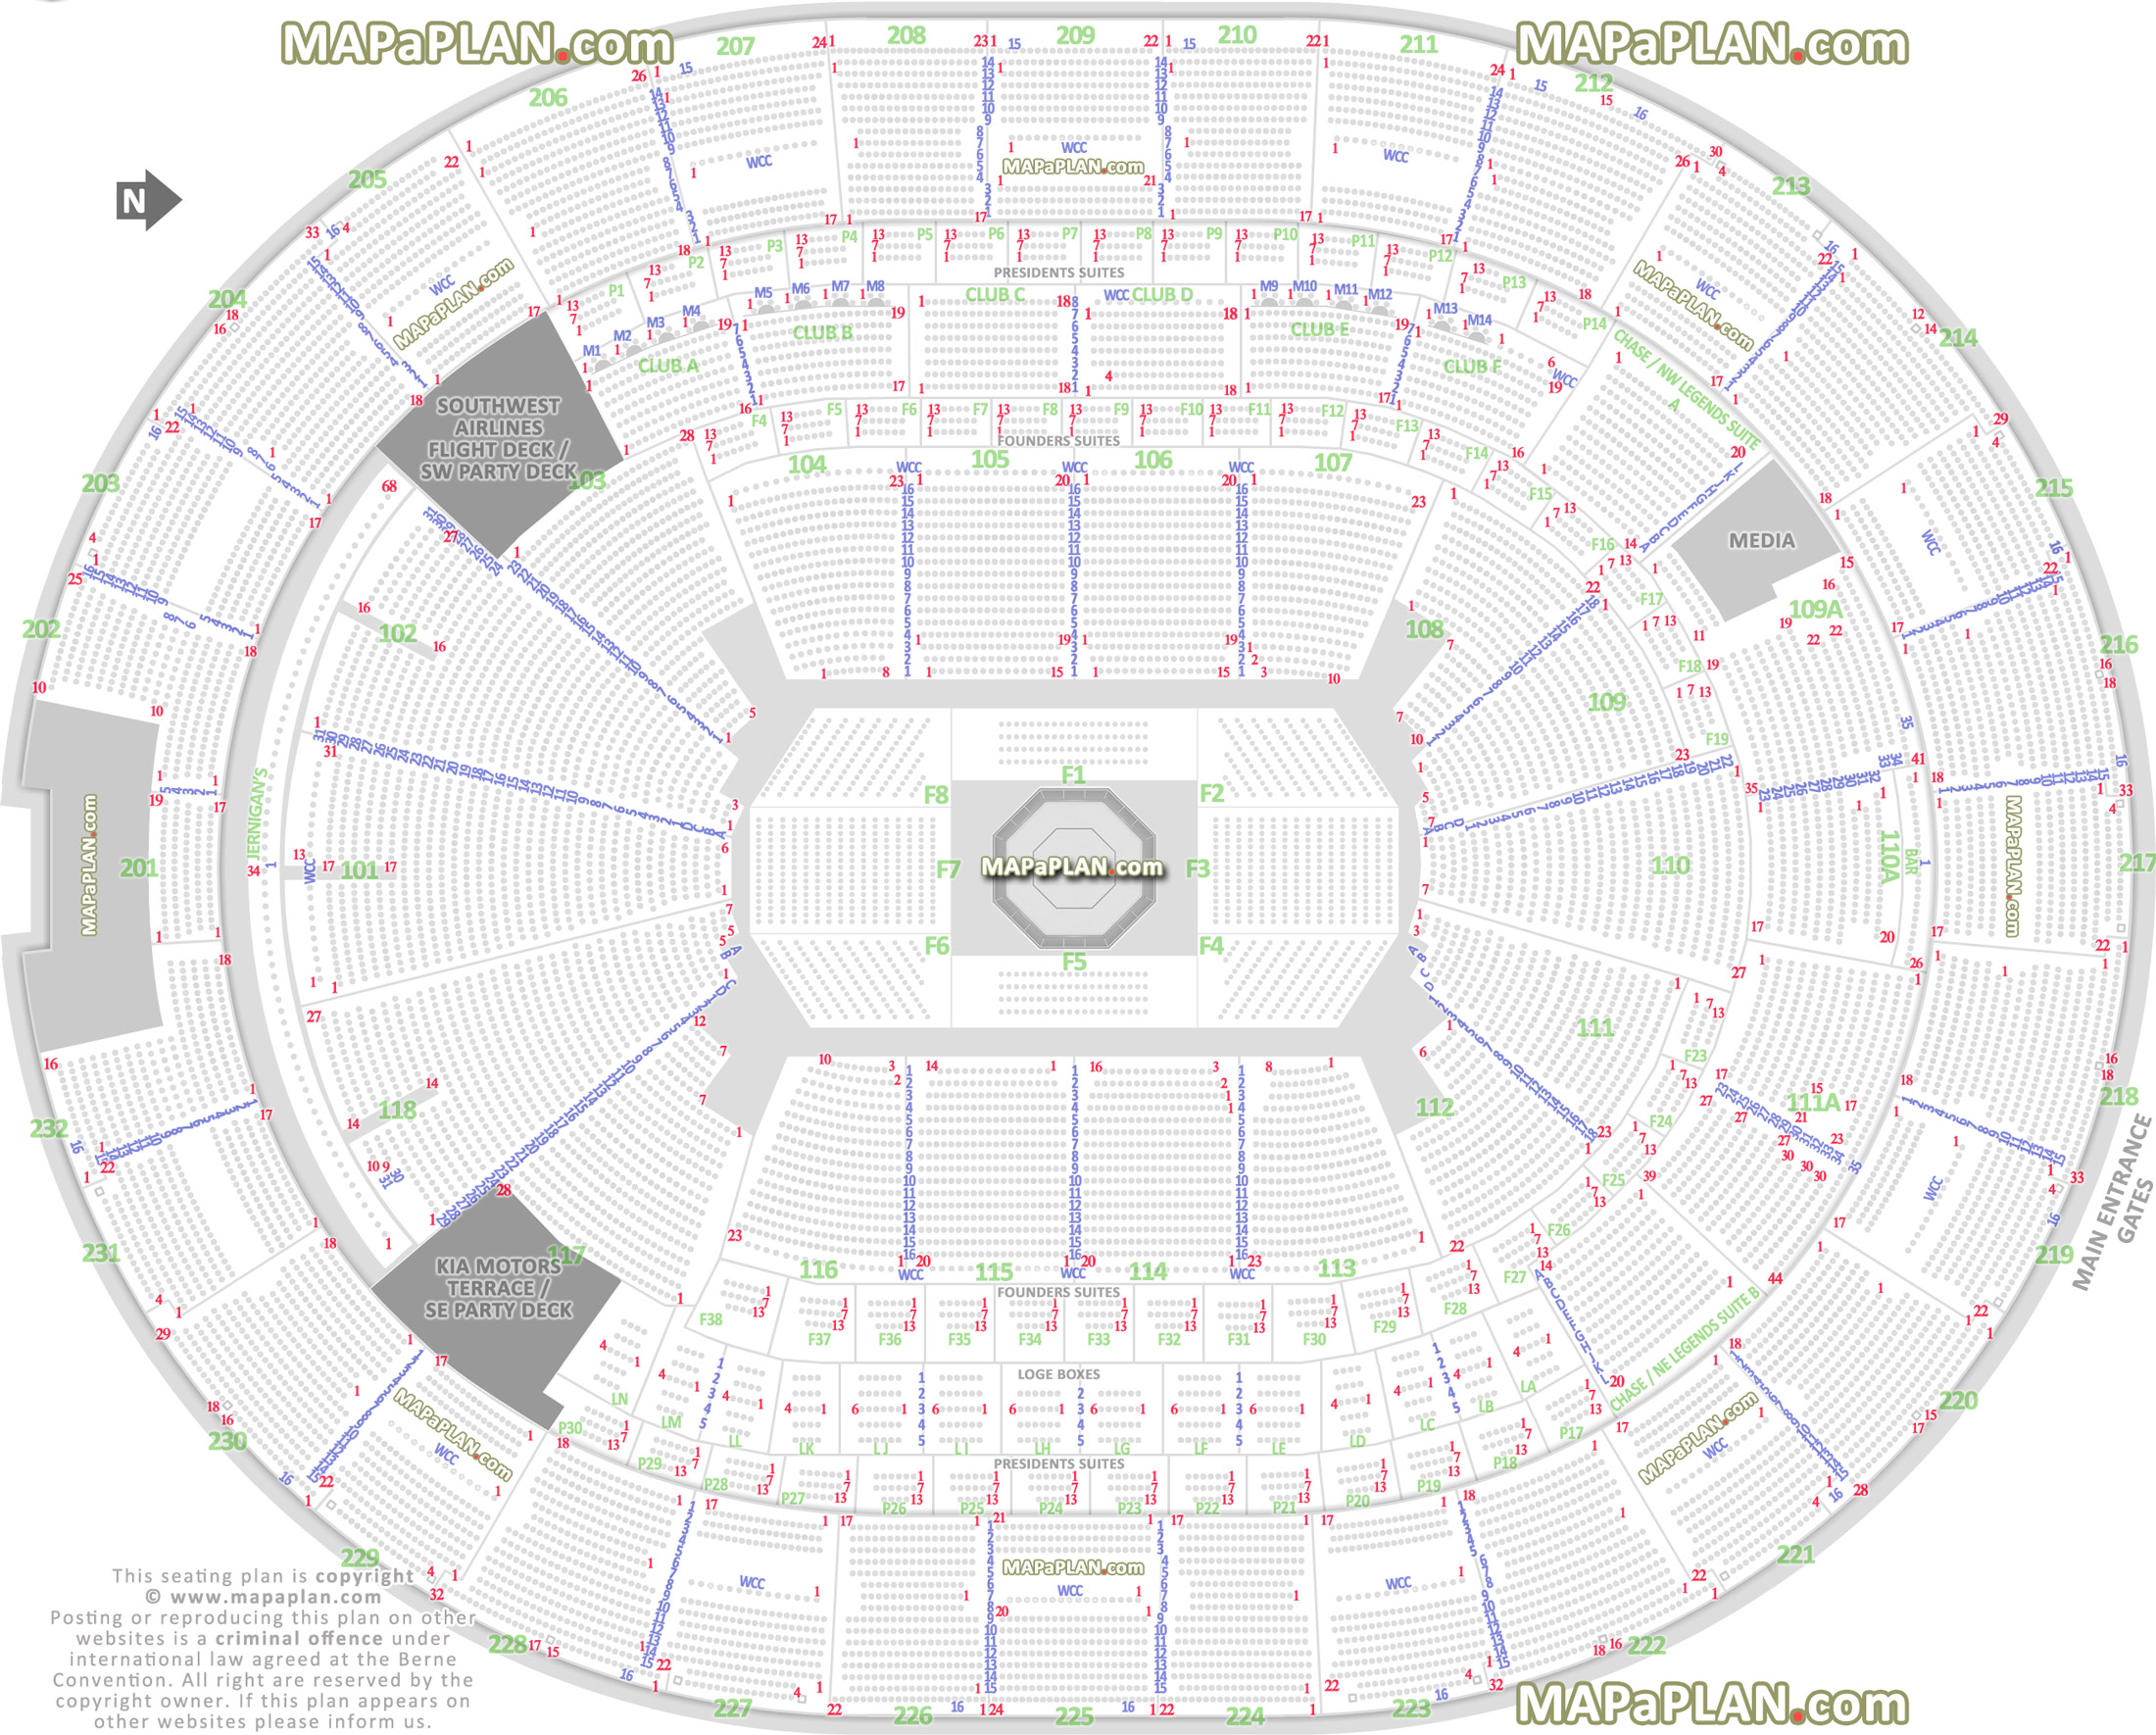 ufc mma fights fully seated setup viewer premium luxury executive vip lounge main entrance gates map wheelchair disabled seating Orlando Kia Center seating chart